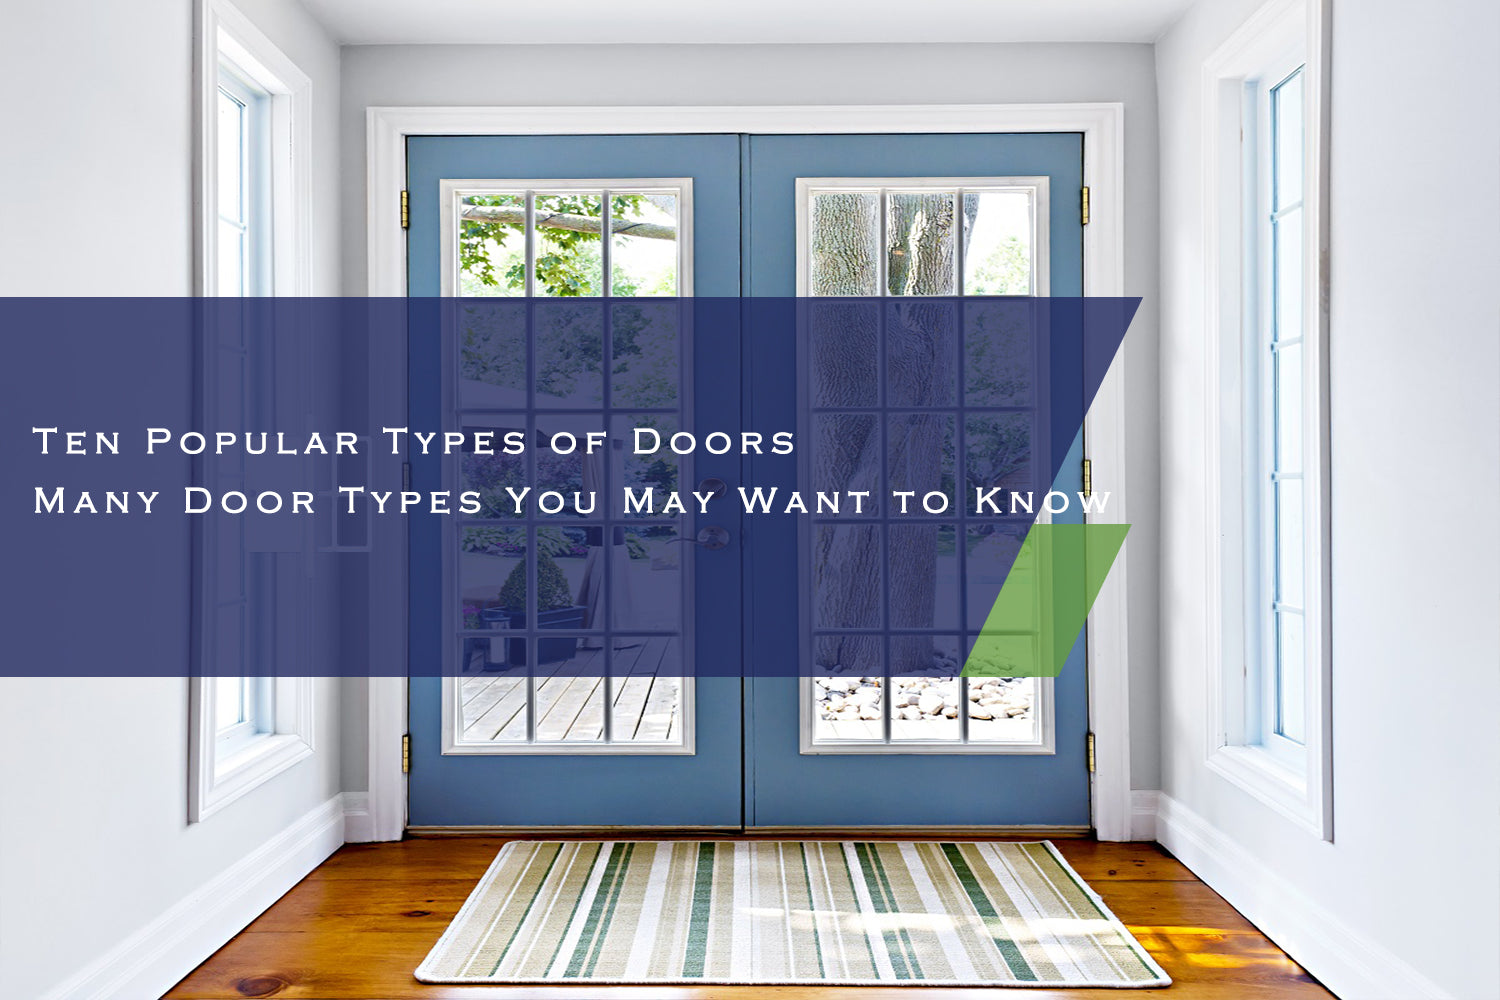 Ten Popular Types of Doors-Many Door Types You May Want to Know